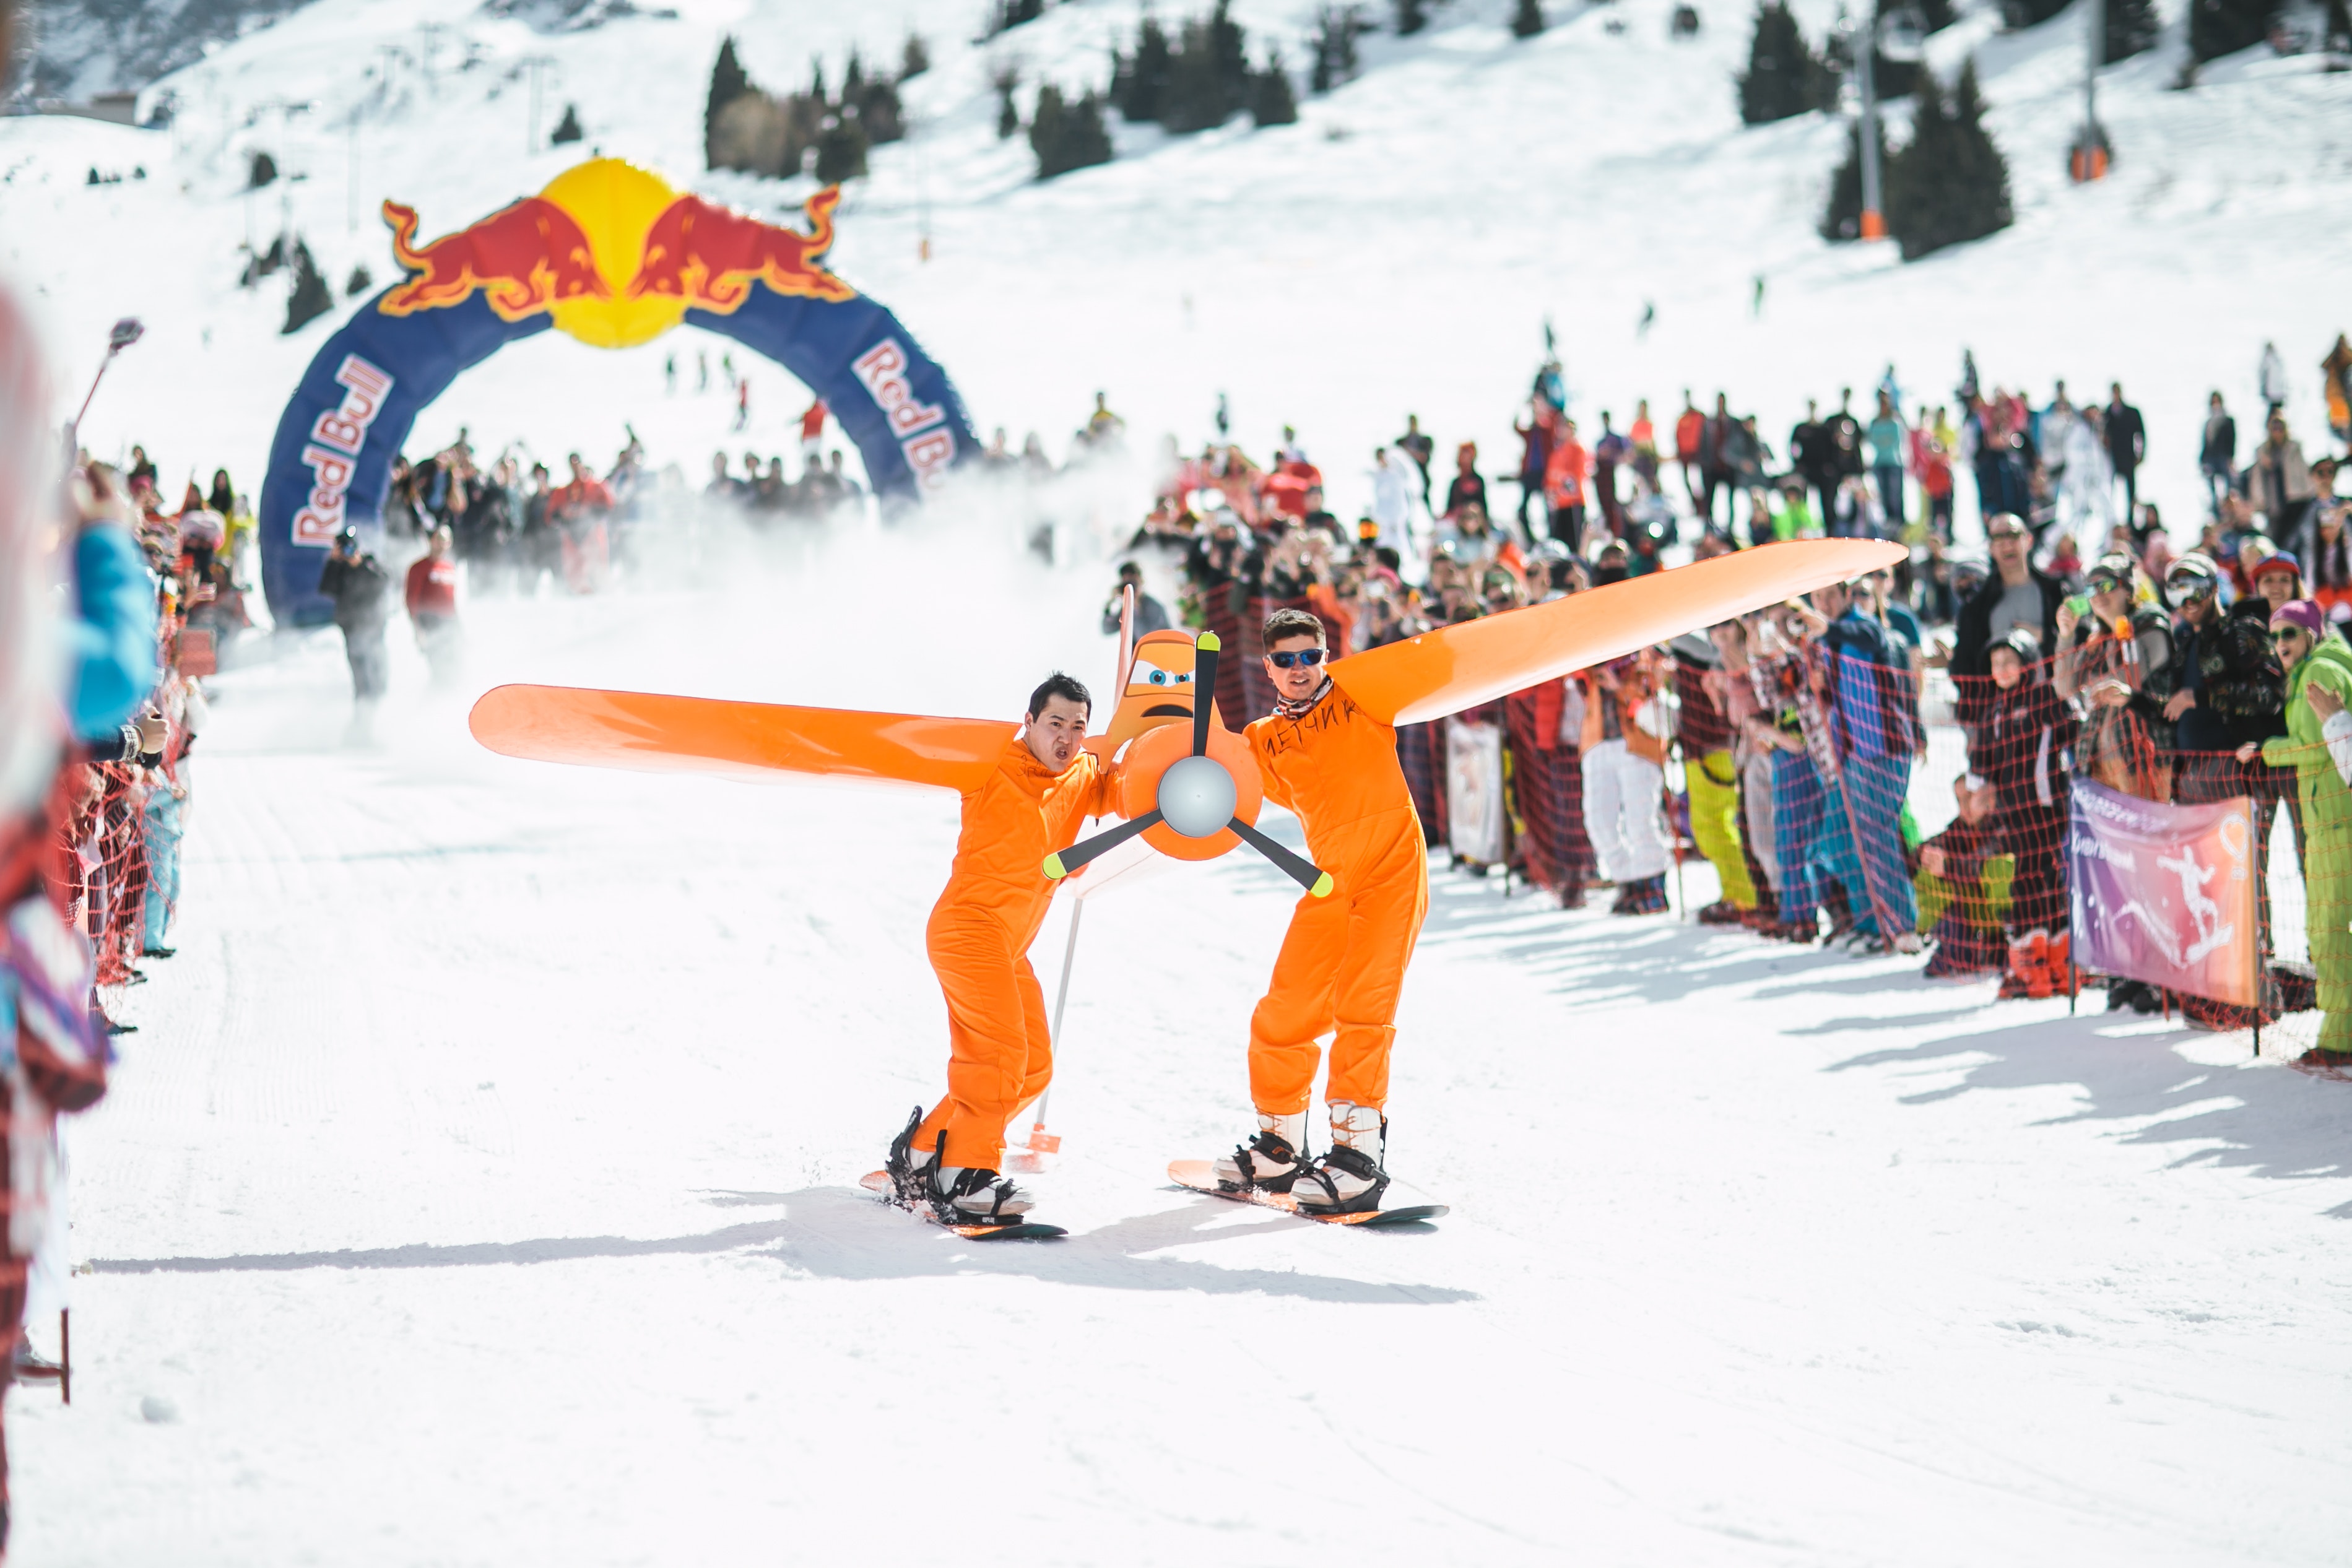 Photography of men in orange suits ridding snowboard